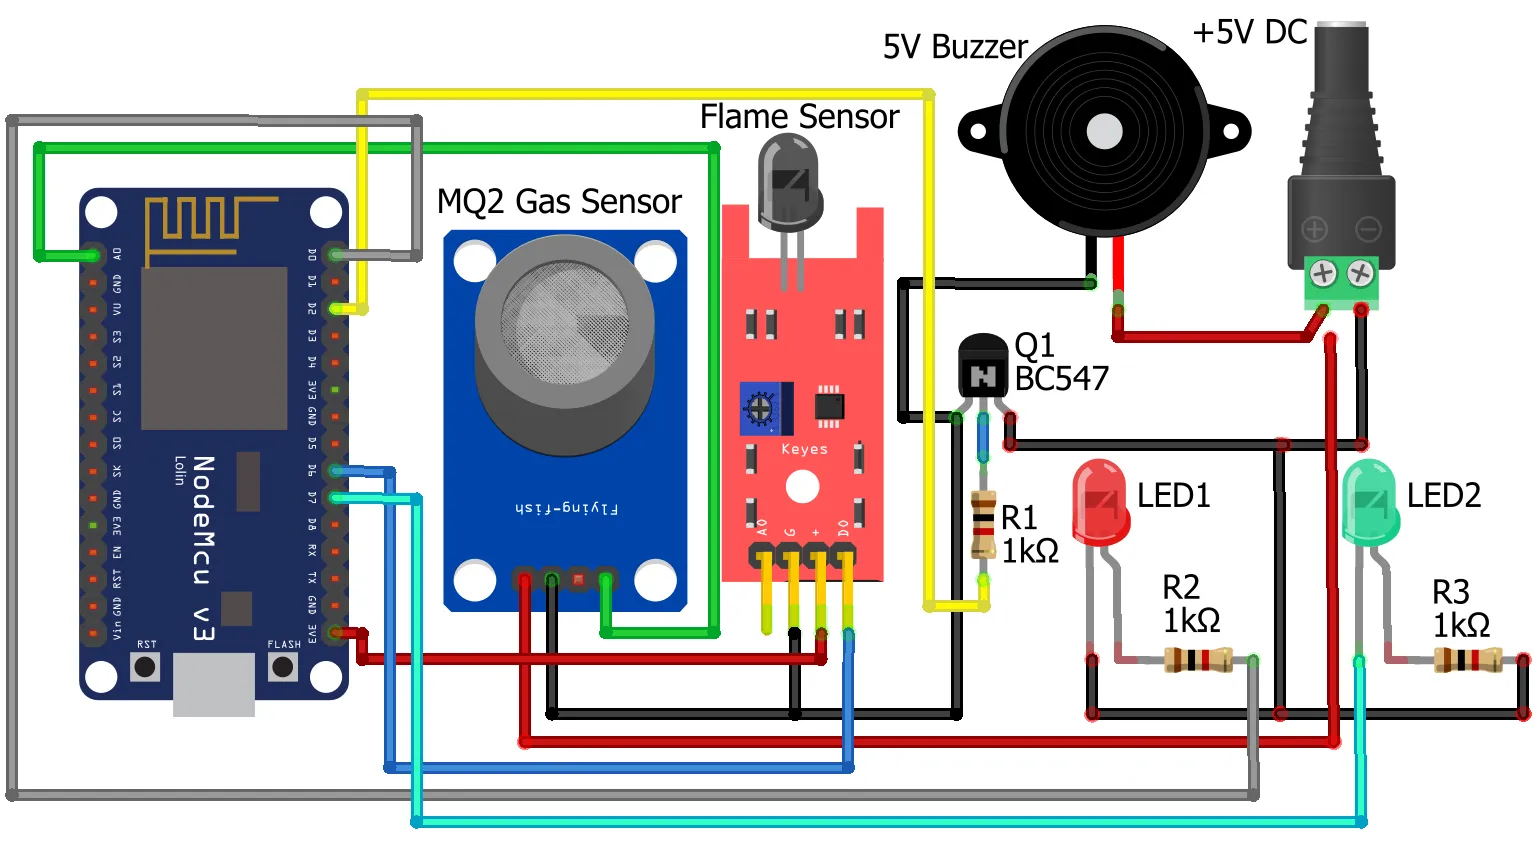 IoT based Fire Security Alarm System using NodeMCU